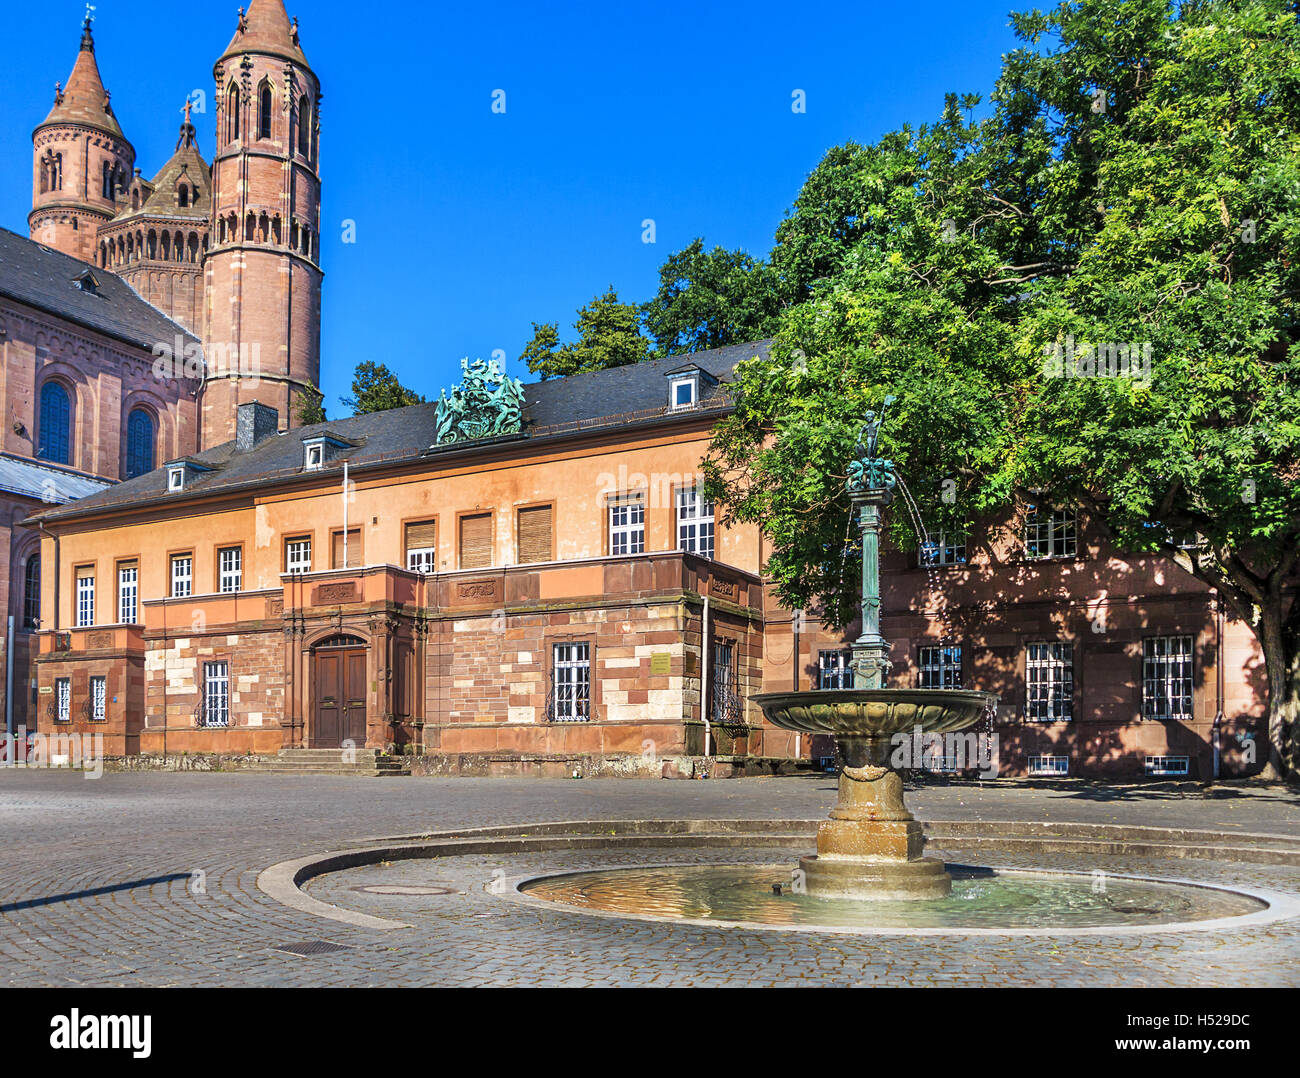 The Schlossplatz next to the Cathedral in Worms, Germany Stock Photo